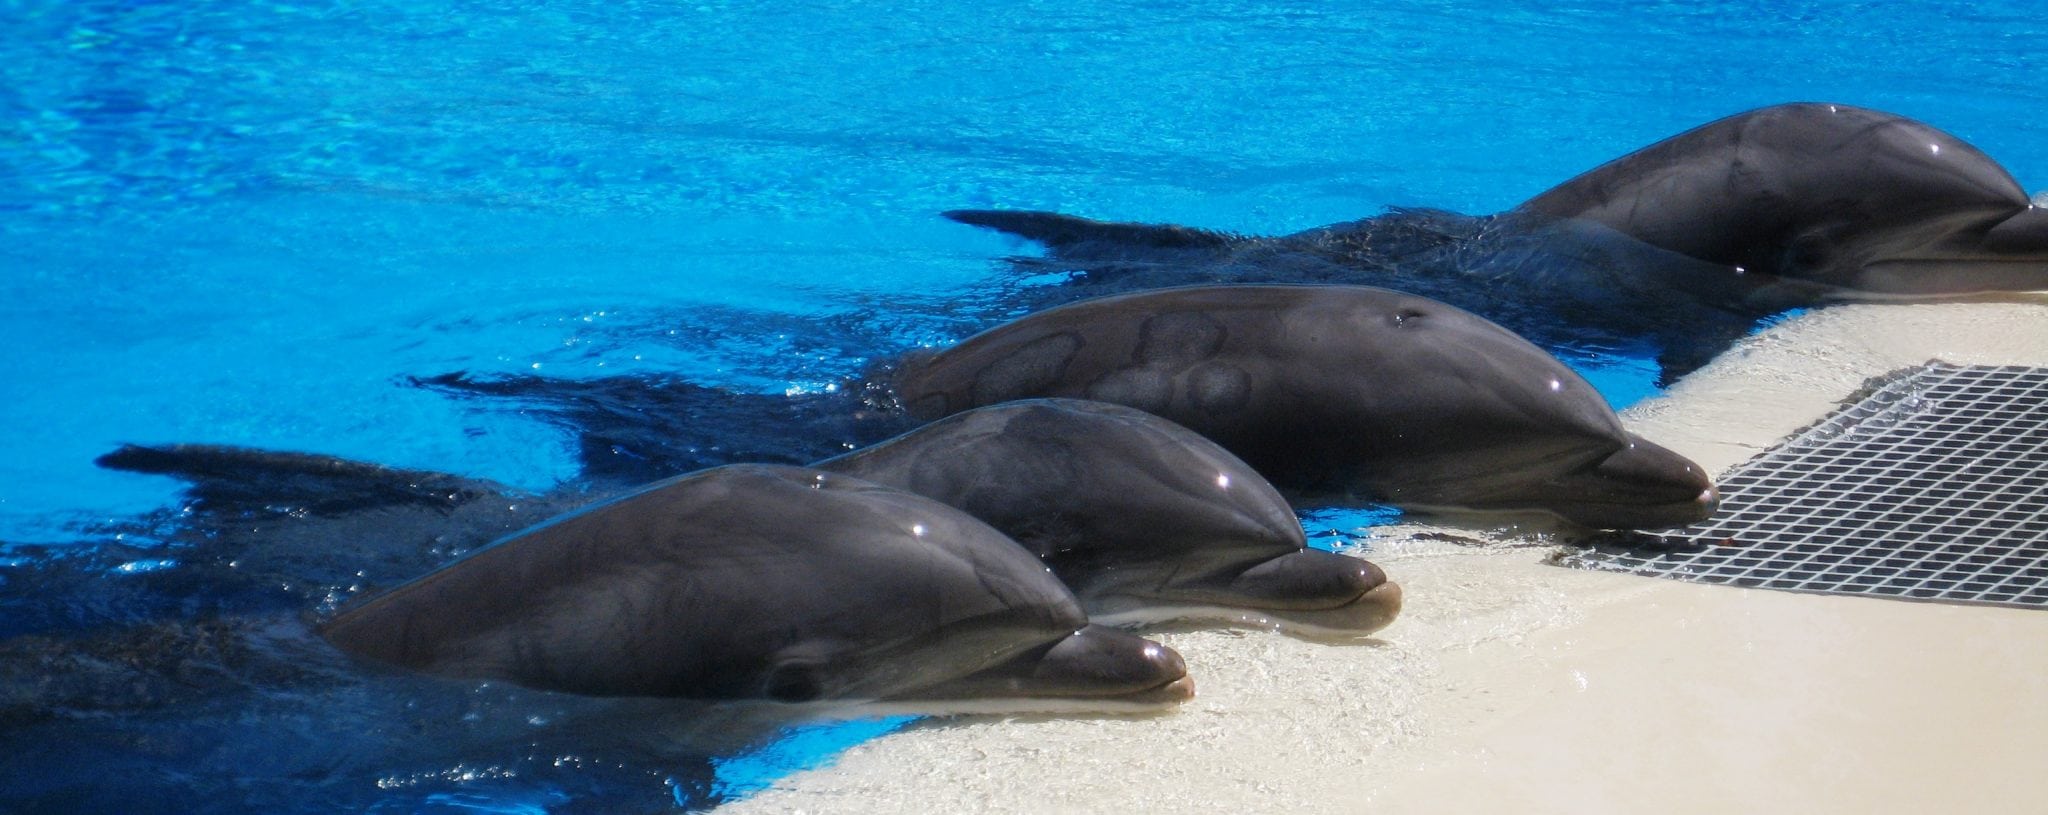 Controversial captive dolphin facility to close following another dolphin death